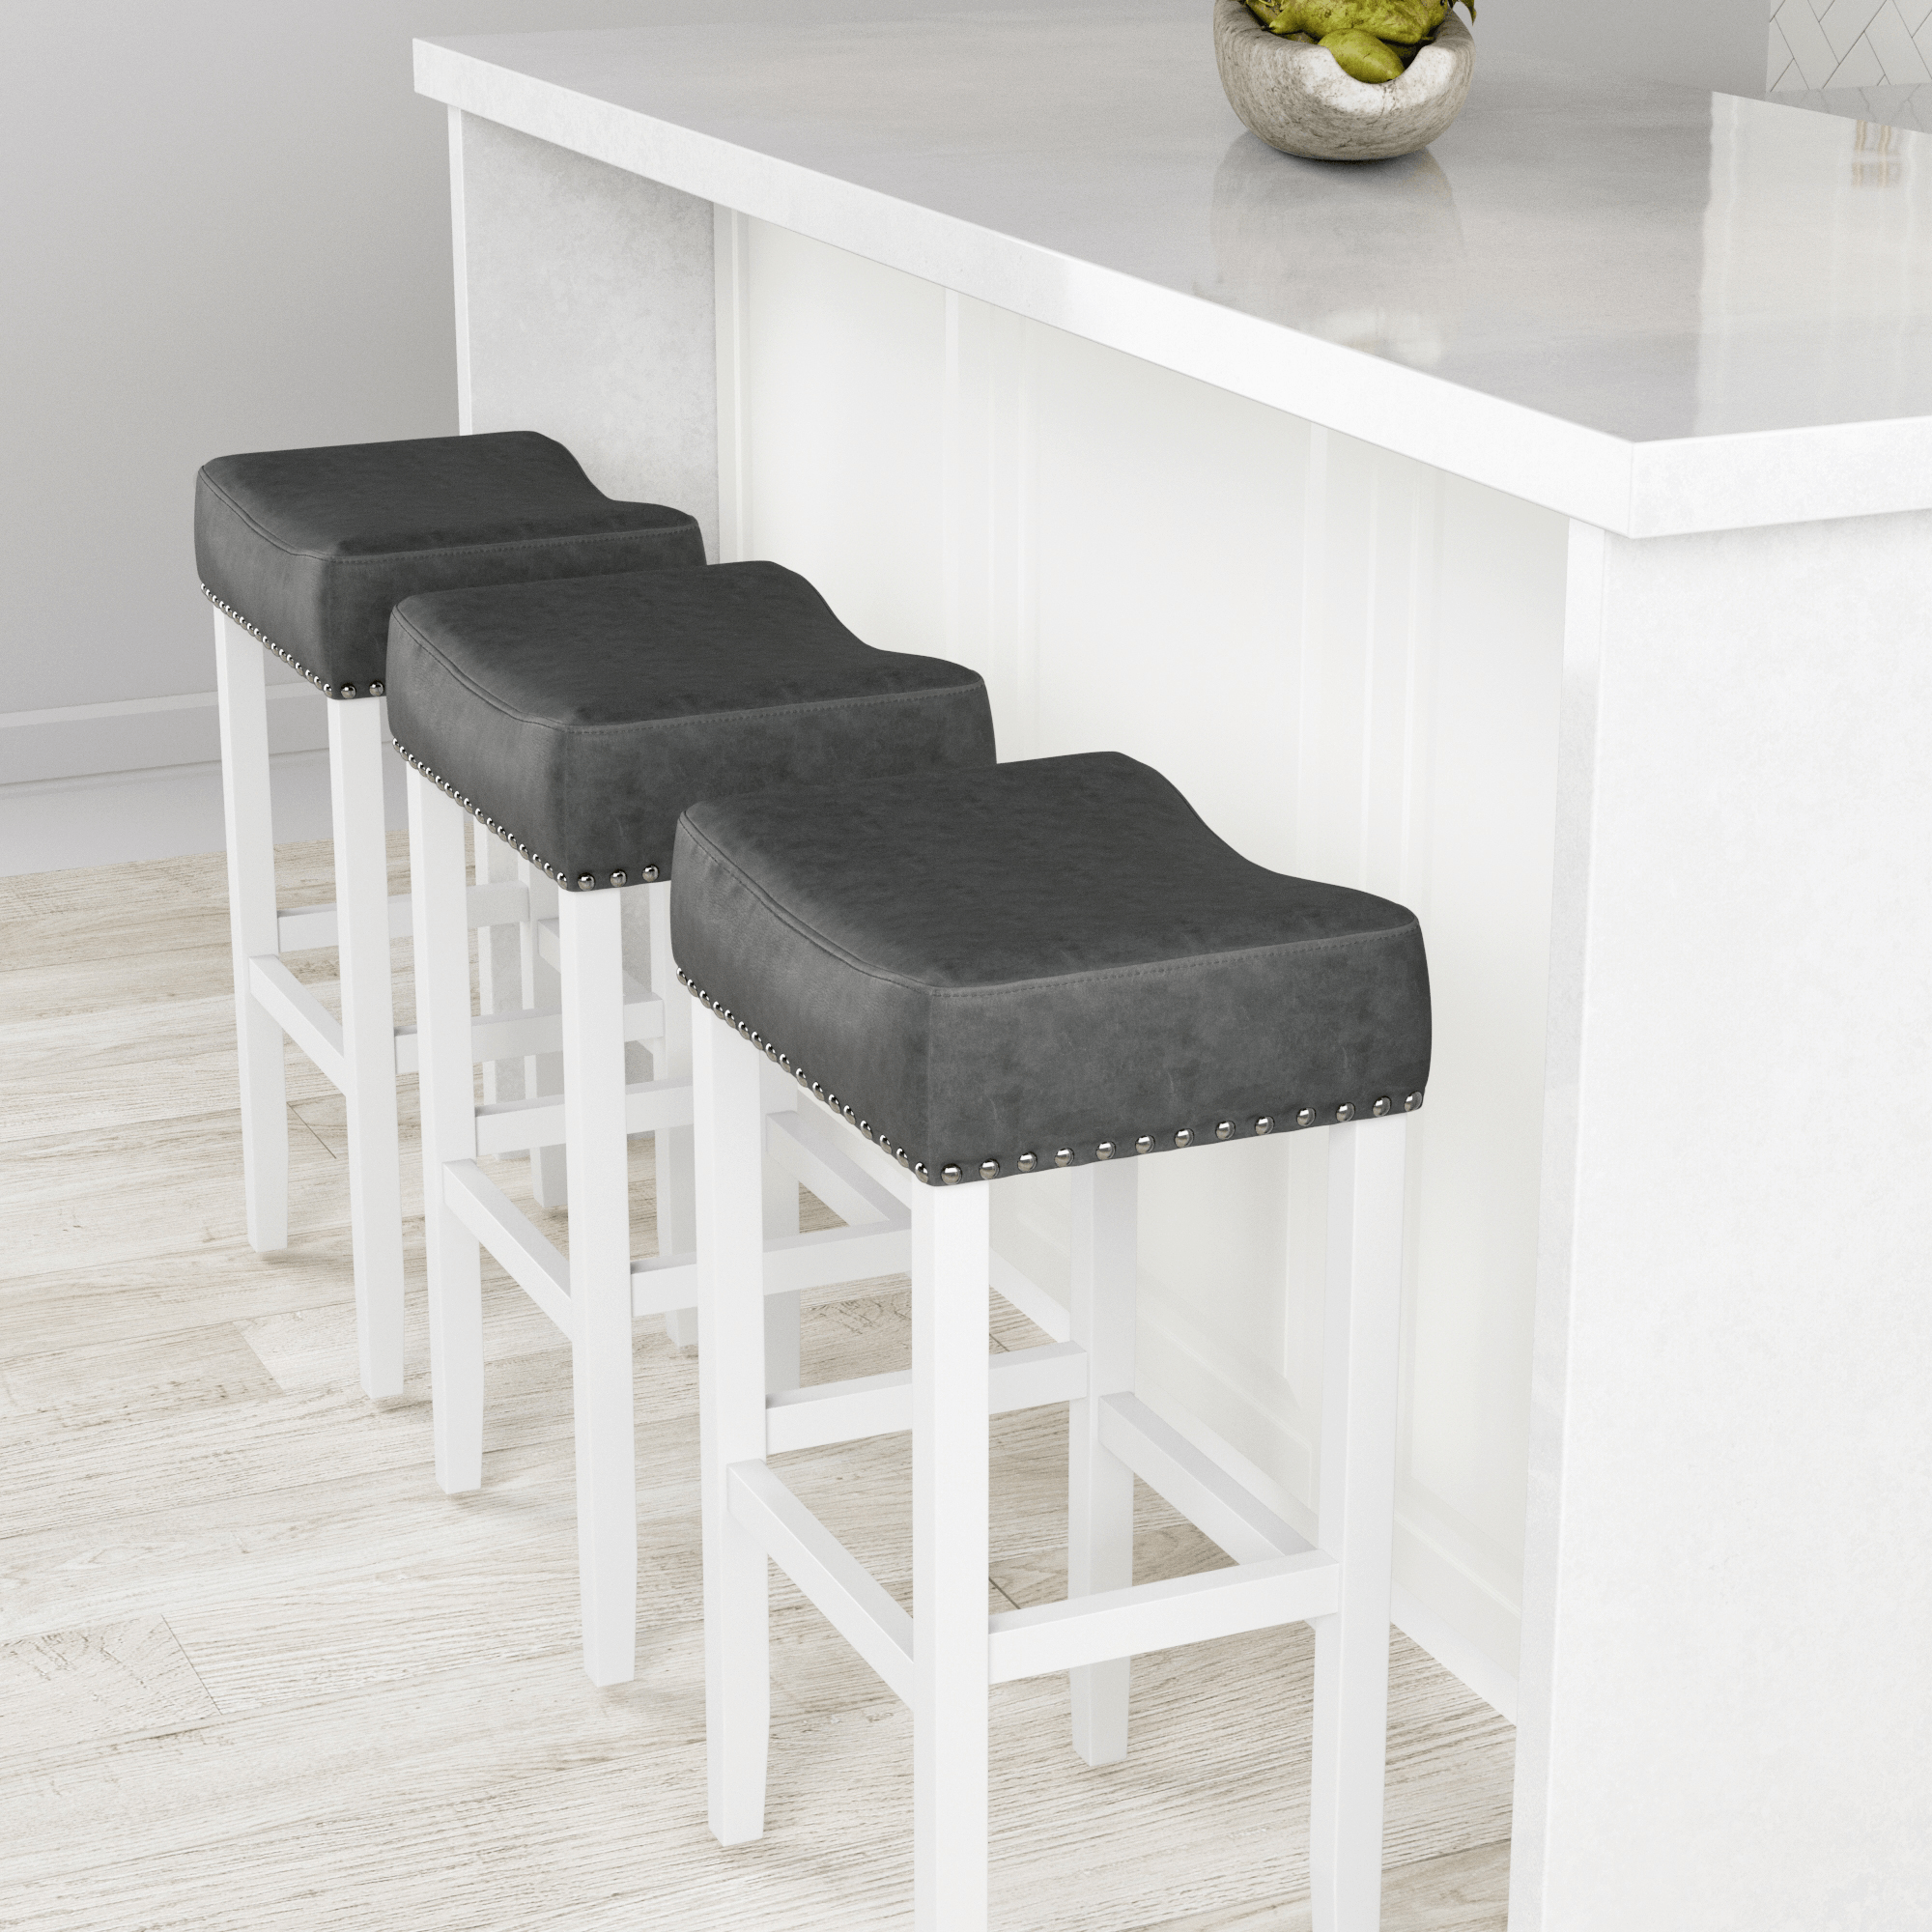 Hylie | Counter-Height Bar Stools - Nathan James